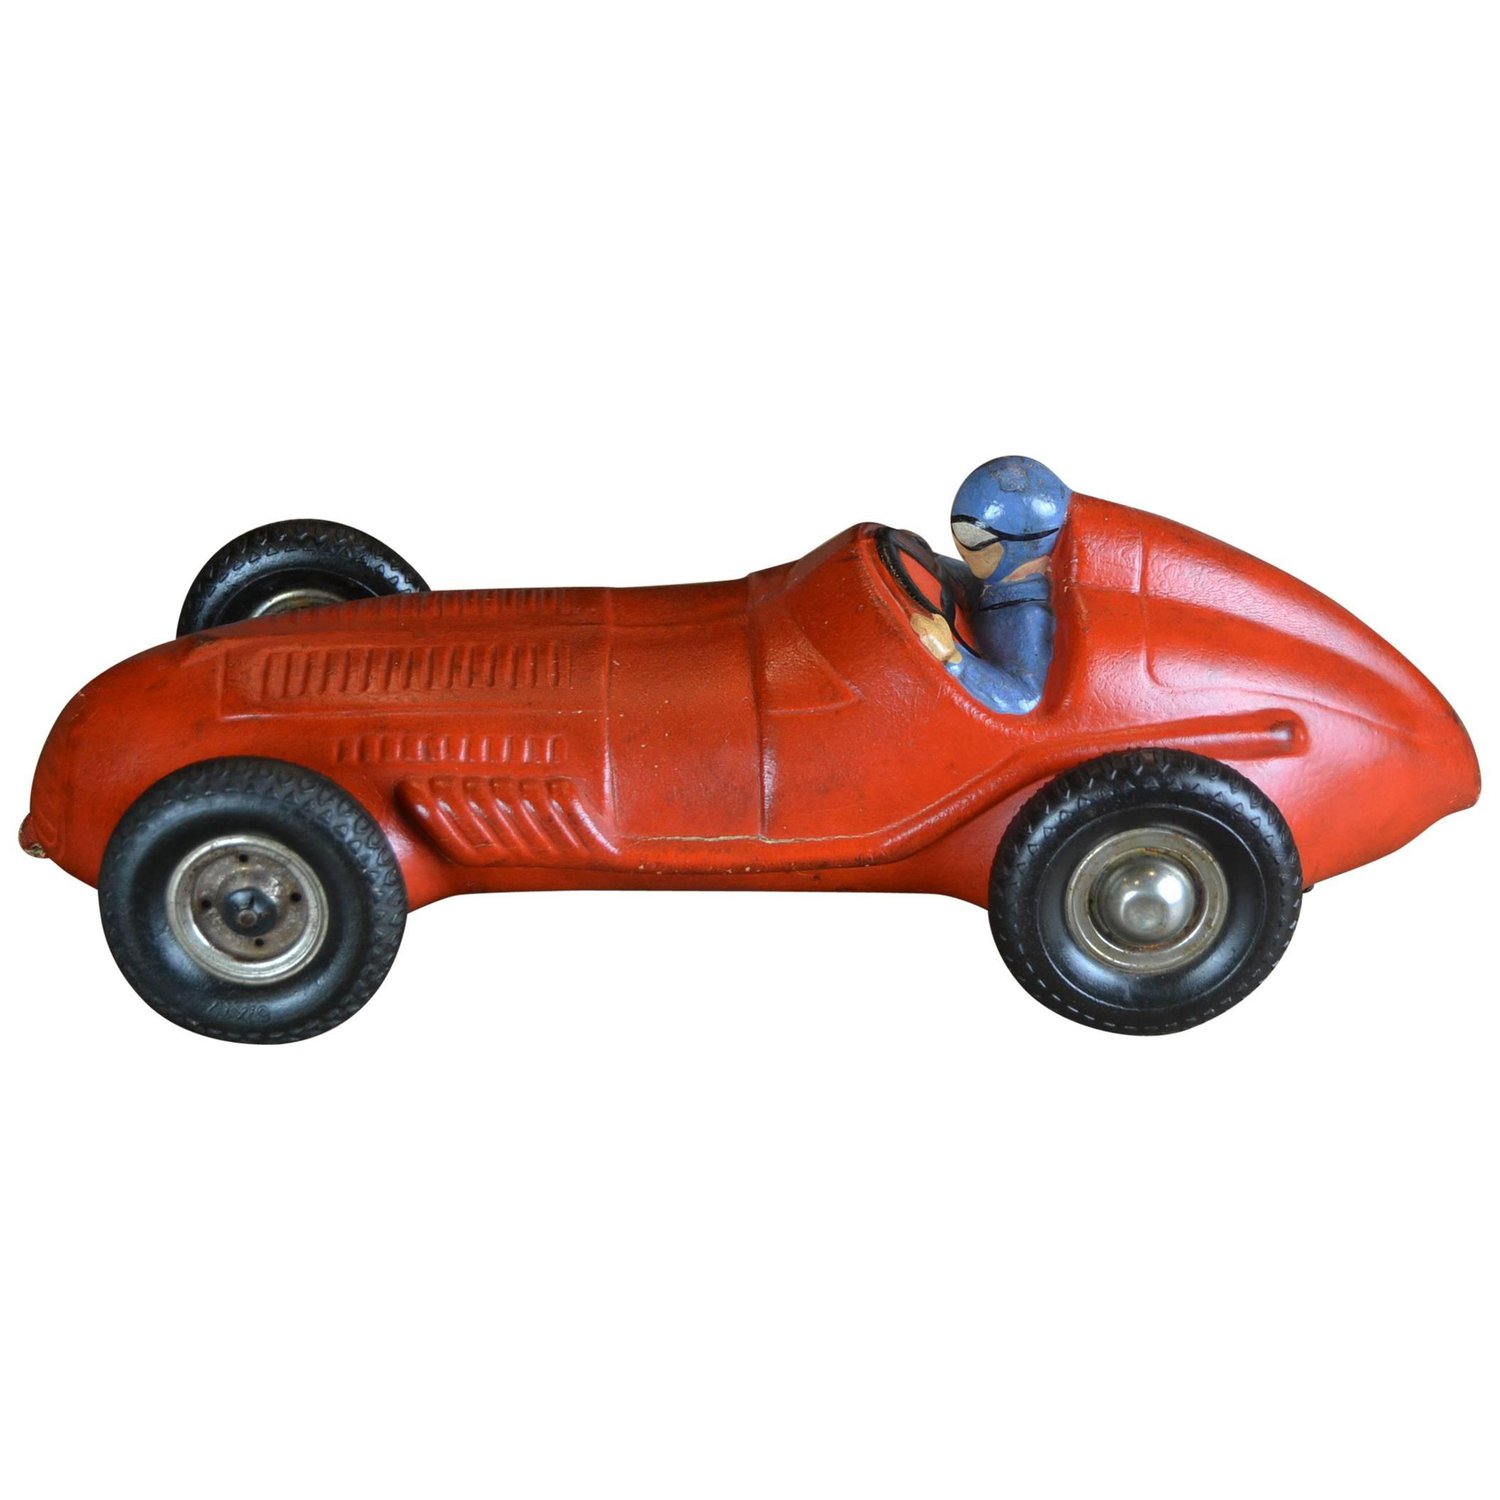 Antique and Vintage Toy Cars - 78 For Sale on 1stdibs